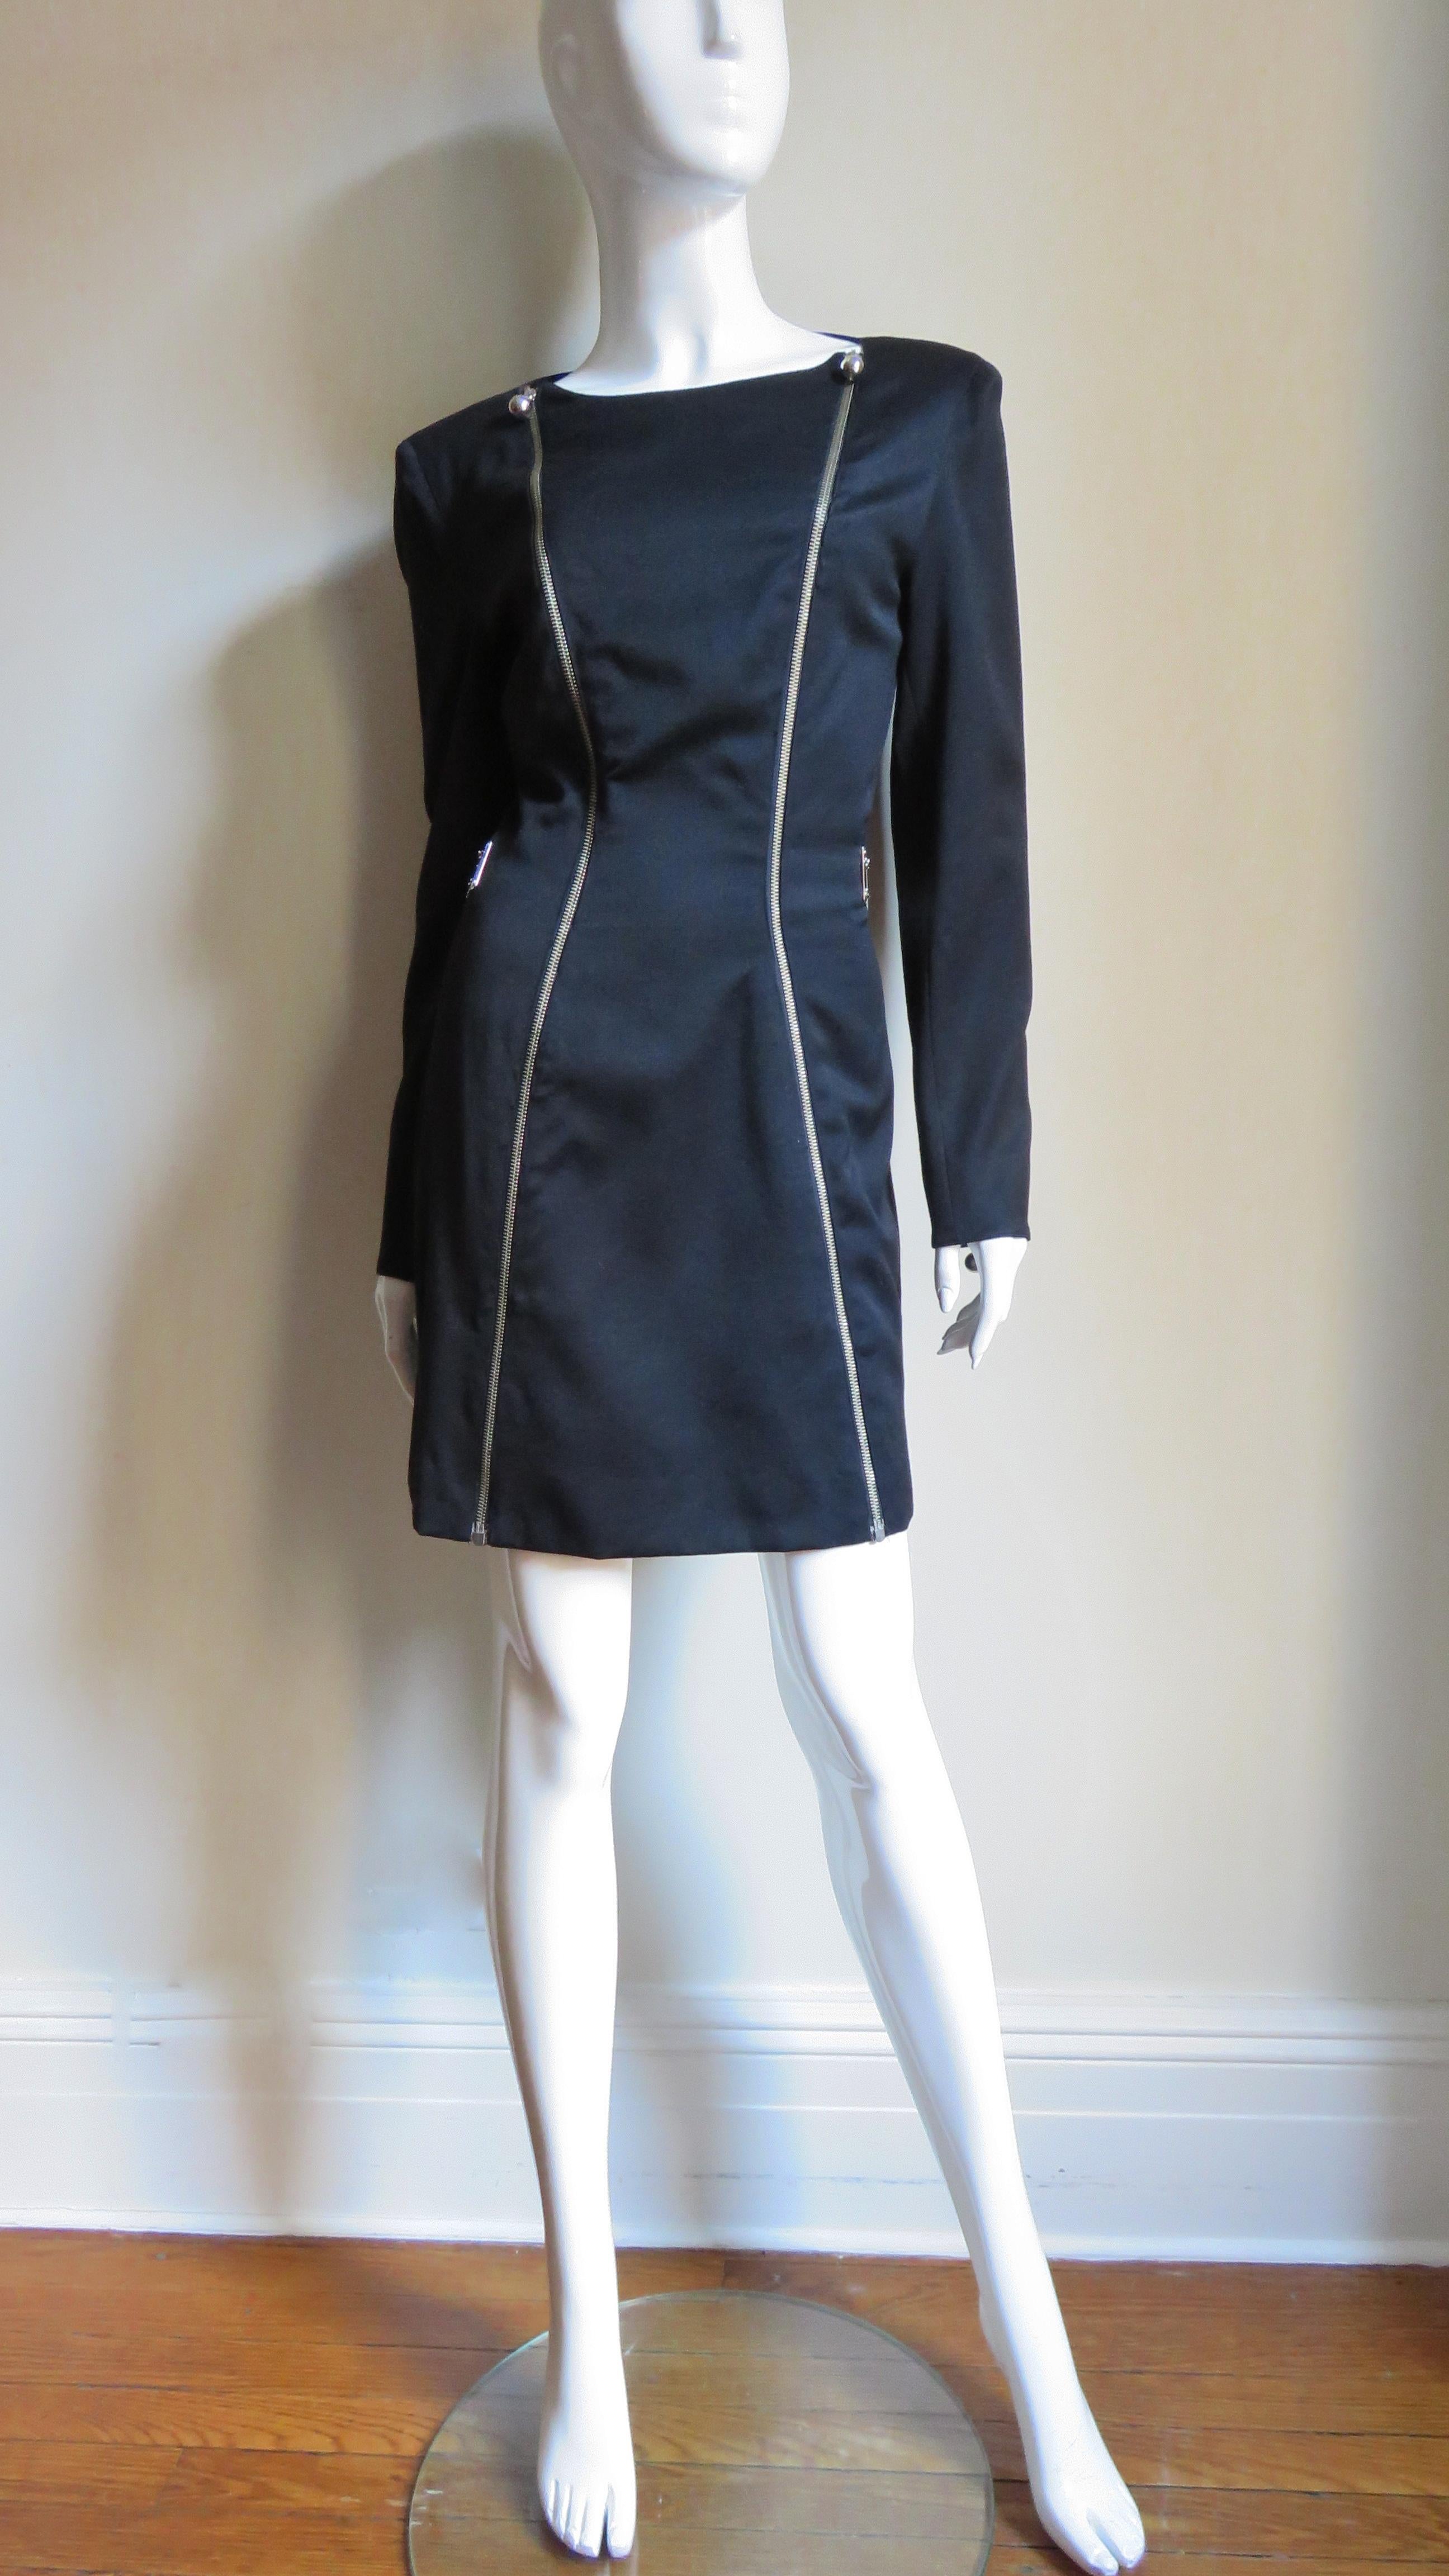 Claude Montana Zipper Dress with Metal Link Belt In Good Condition For Sale In Water Mill, NY